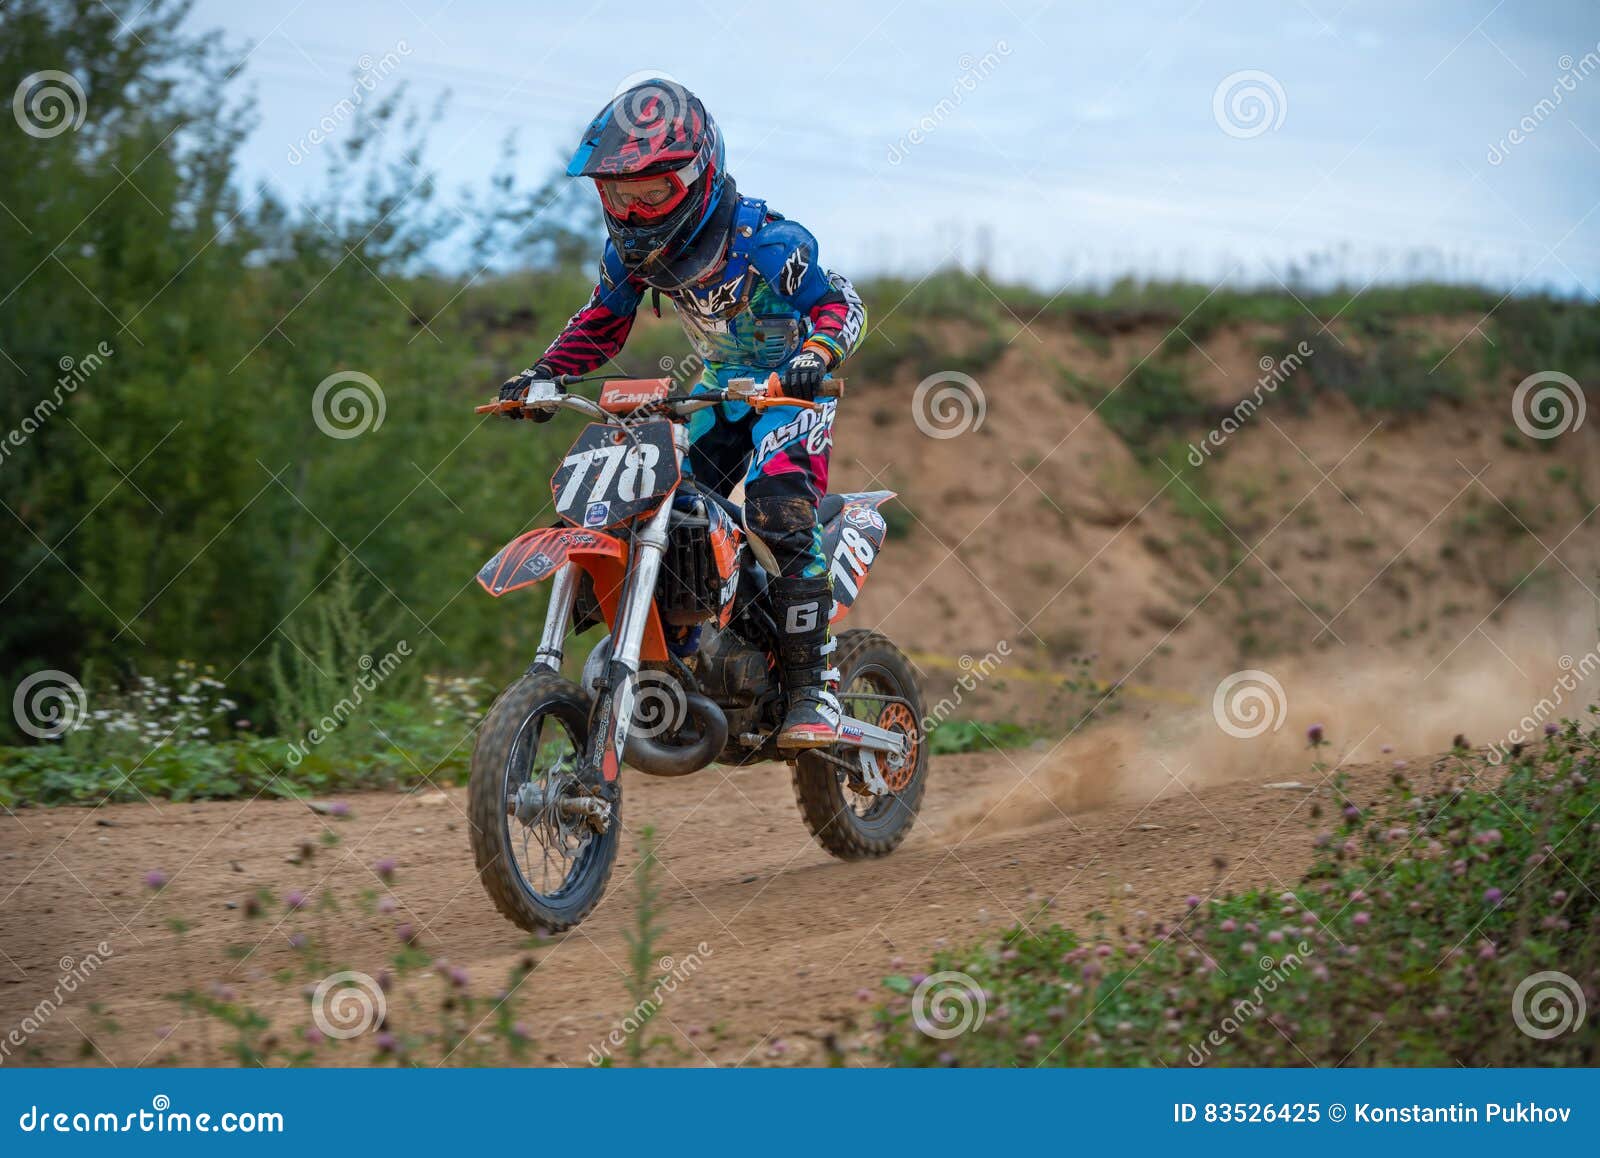 Compter en images... MOTO - Page 17 Lobashev-egor-obninsk-moscow-russia-september-class-country-kidz-stage-xsr-moto-ru-cross-country-moscow-park-83526425